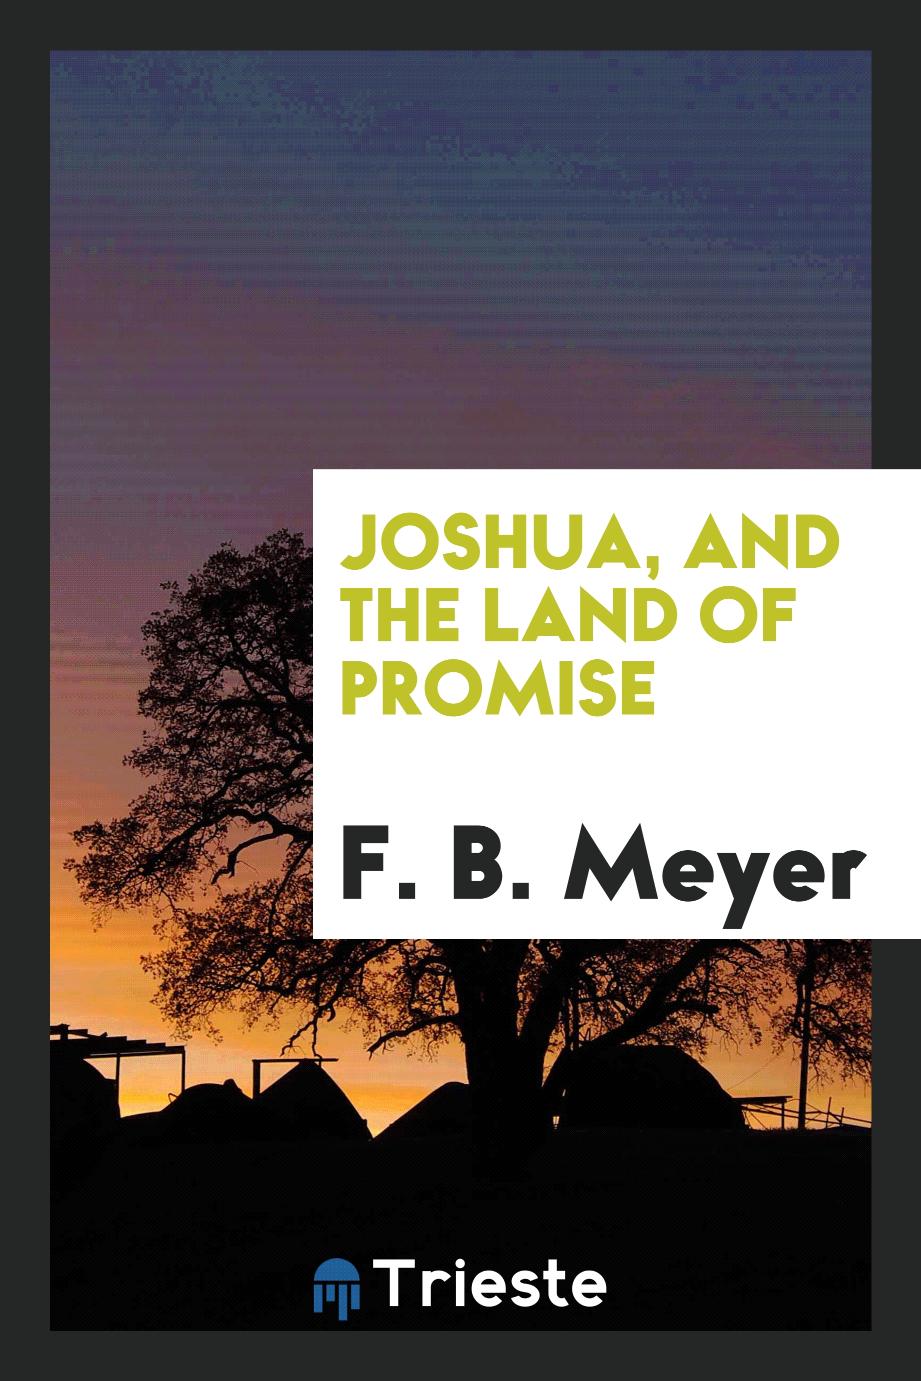 F. B. Meyer - Joshua, and the land of promise